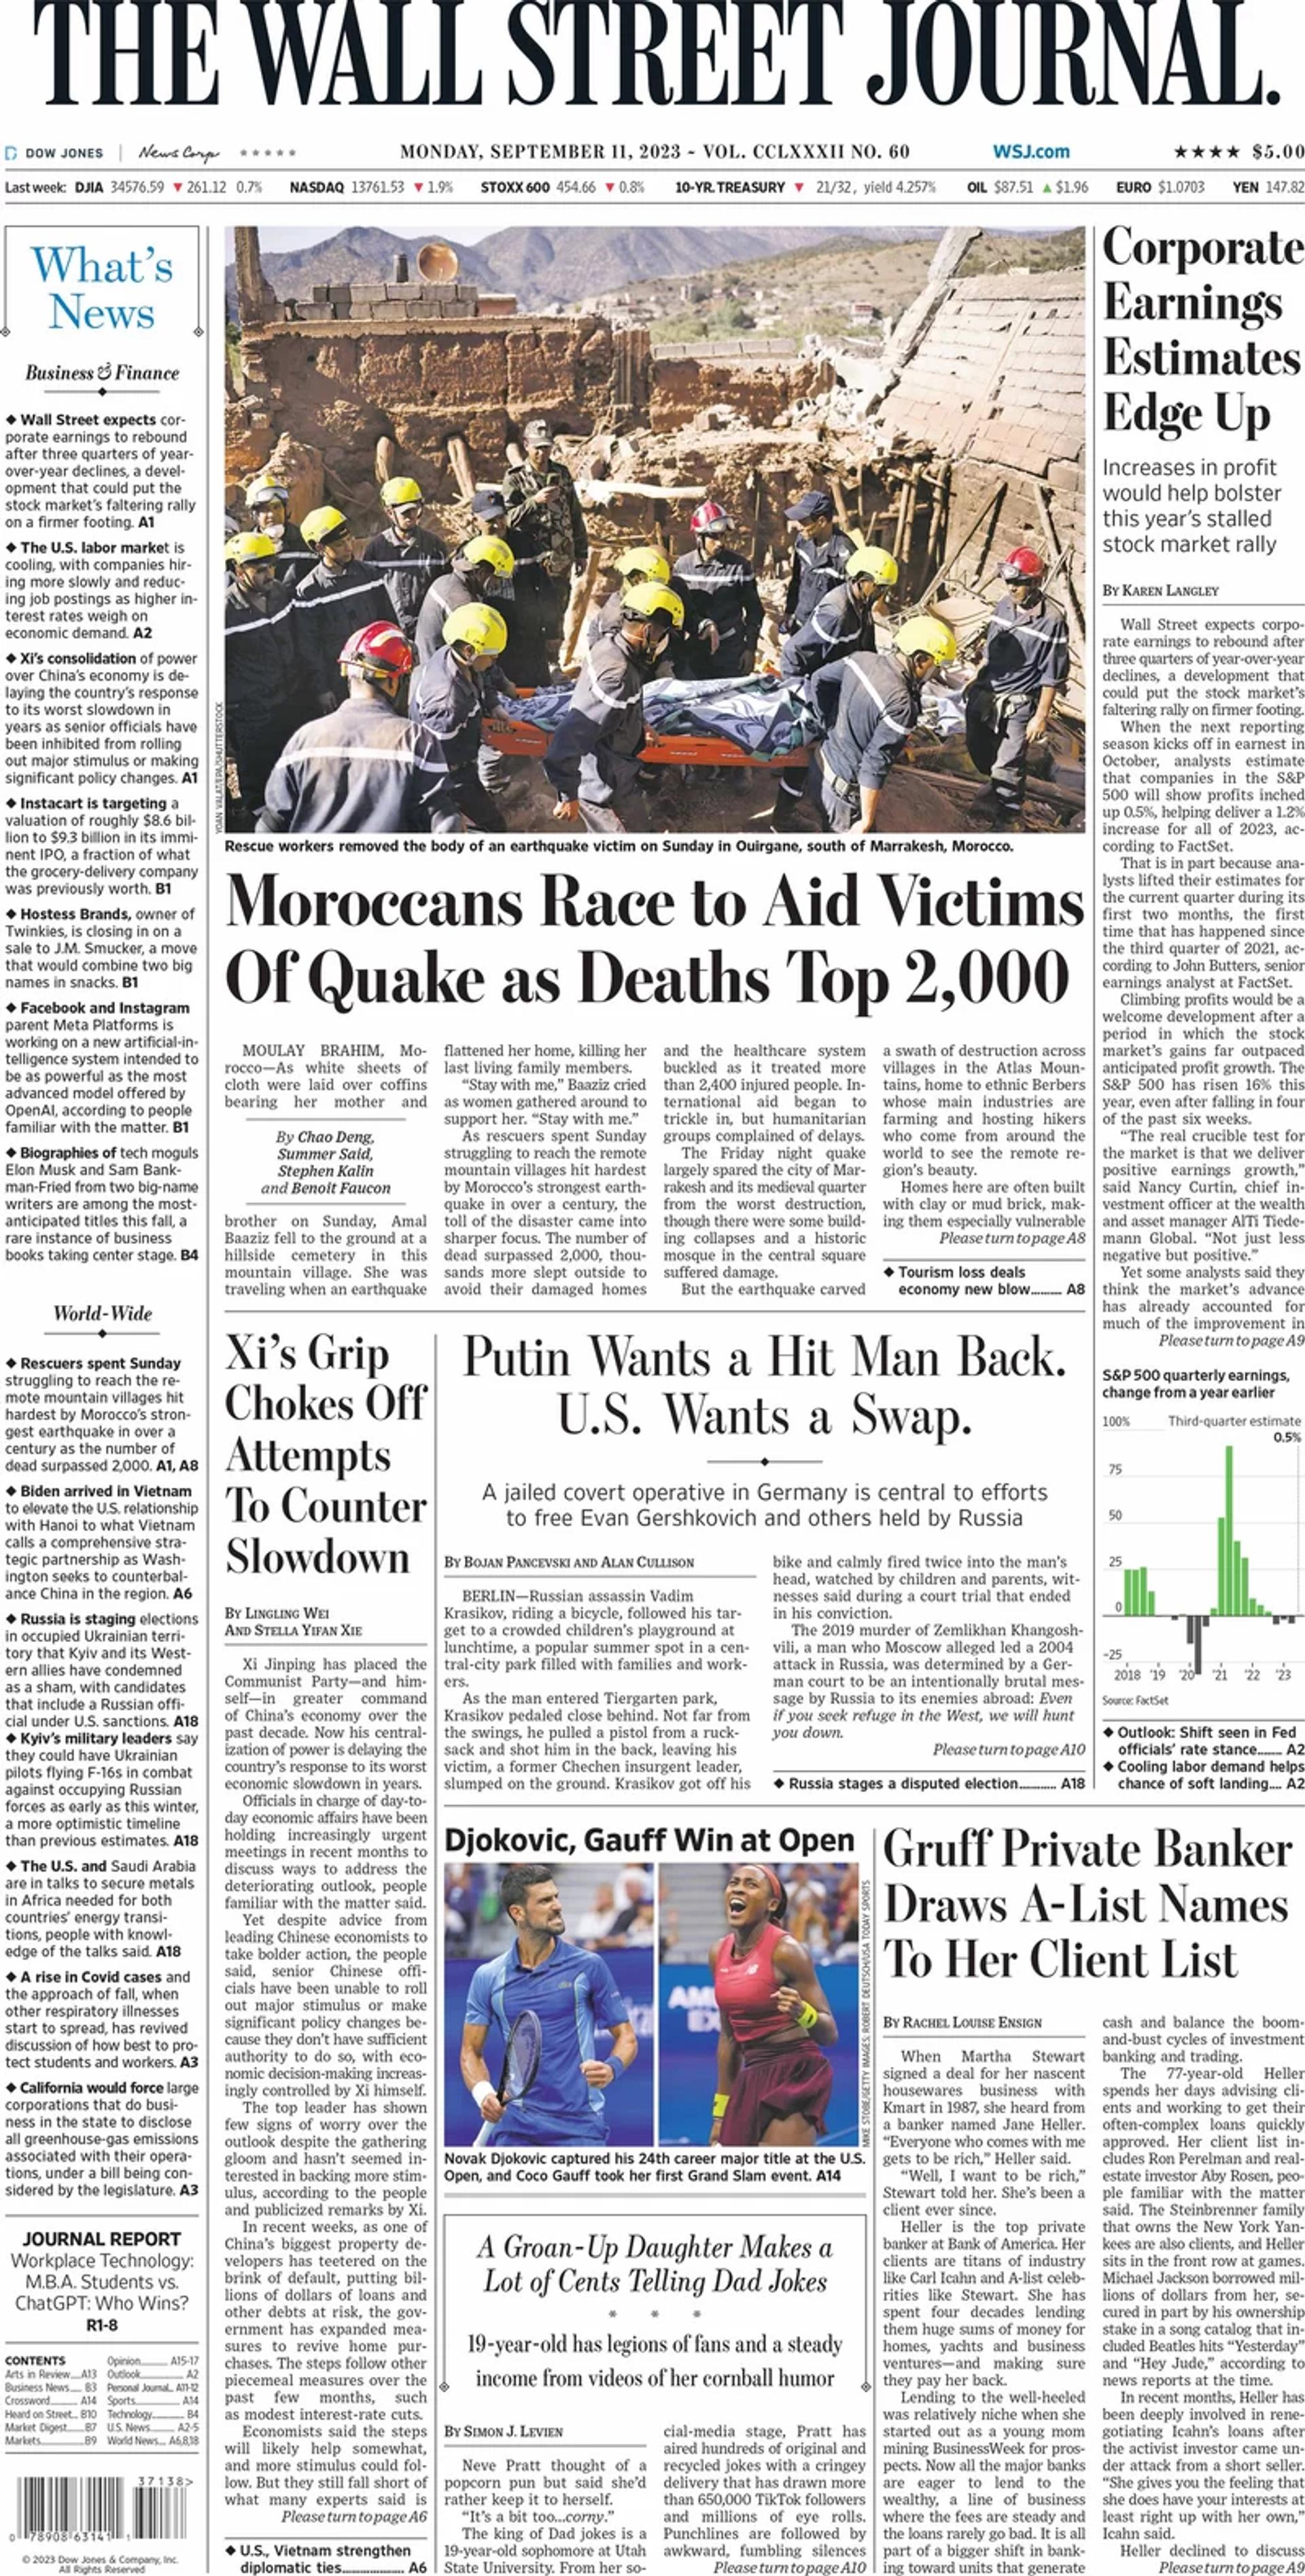 The front page of The Wall Street Journal, Sept. 11, 2023